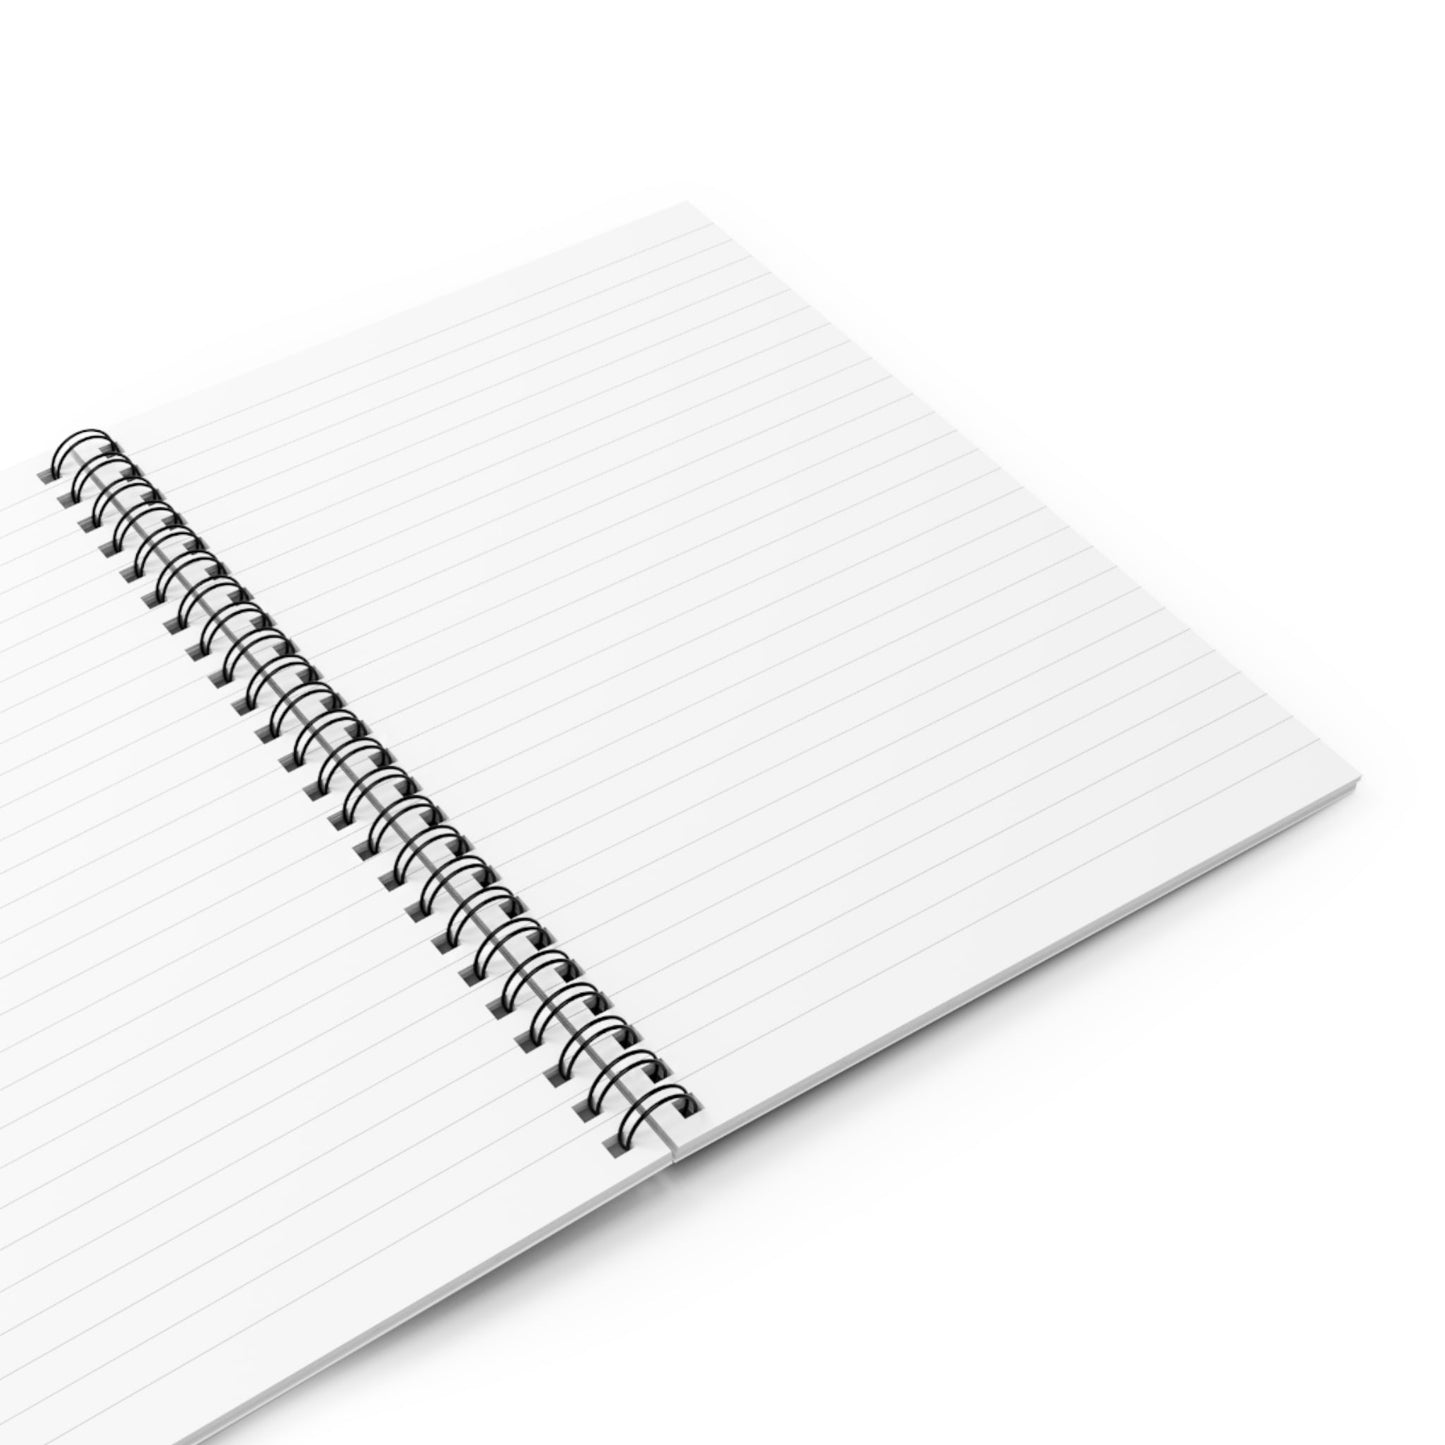 Spiral Notebook with Famous Kissing Cover Opened with Blank White College Ruled Pages